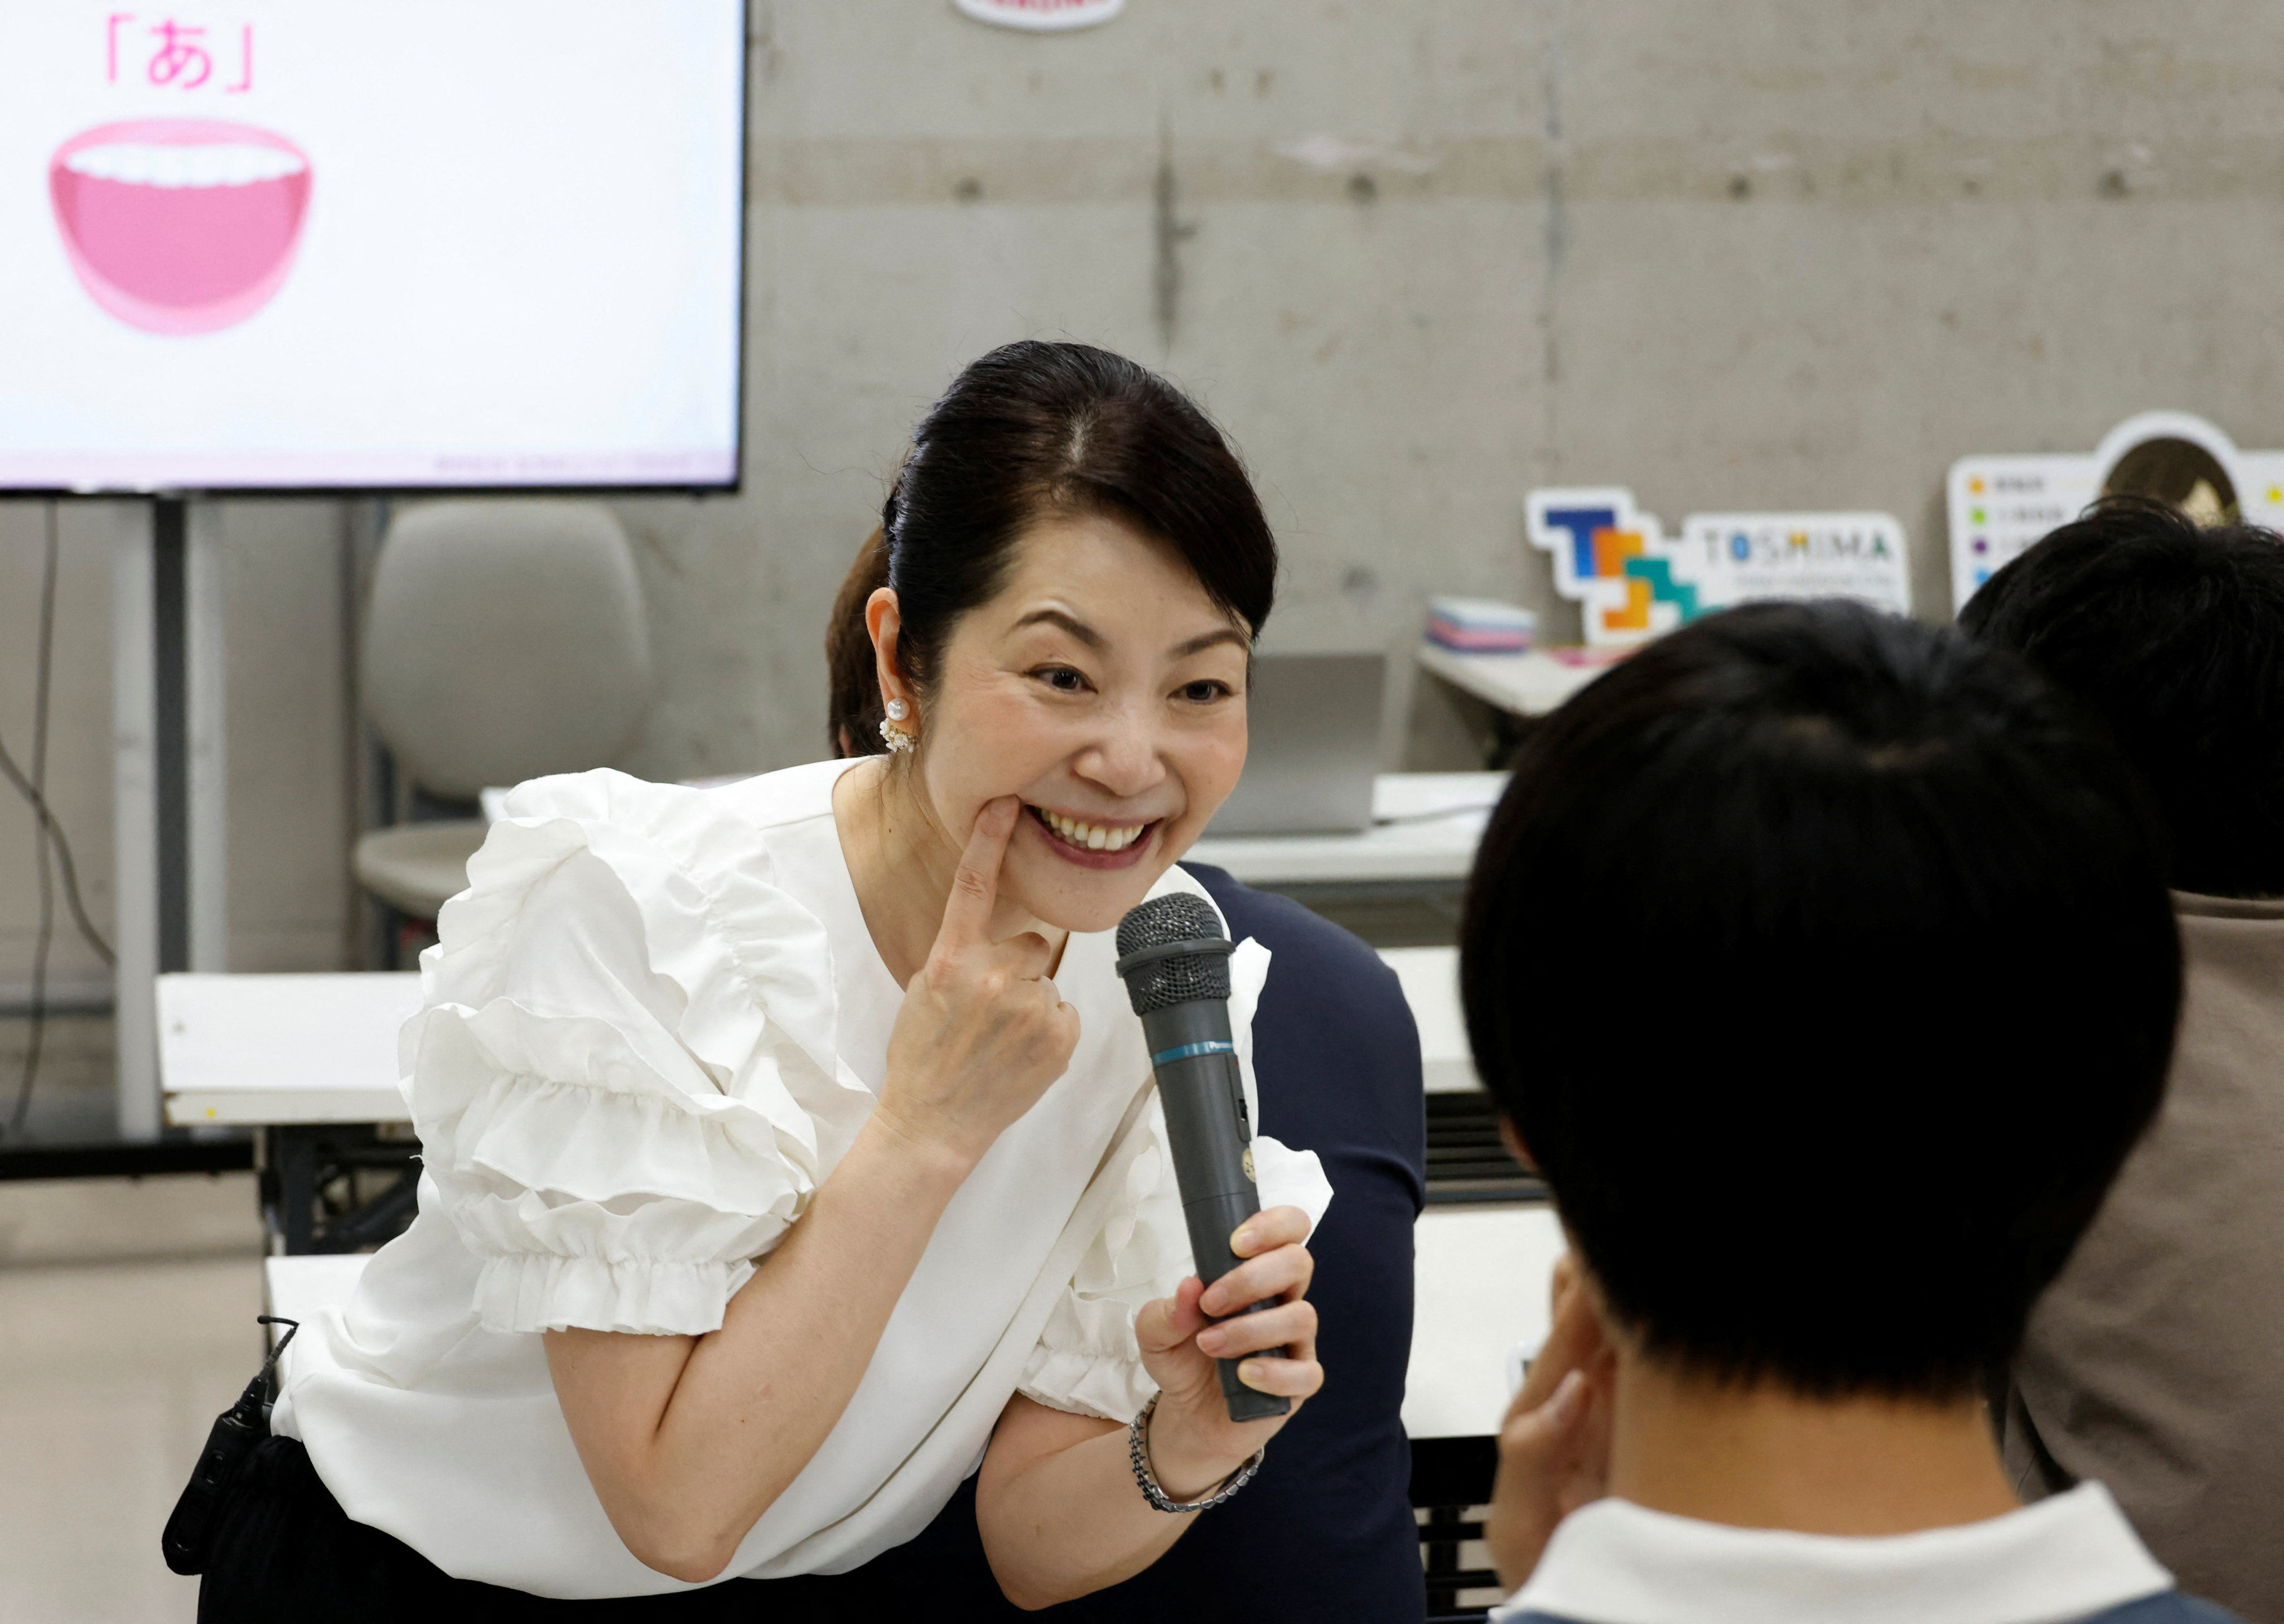 Smile coach Koike Kawano teaches students at a smile training course at Sokei Art School in Tokyo last month. Photo: Reuters